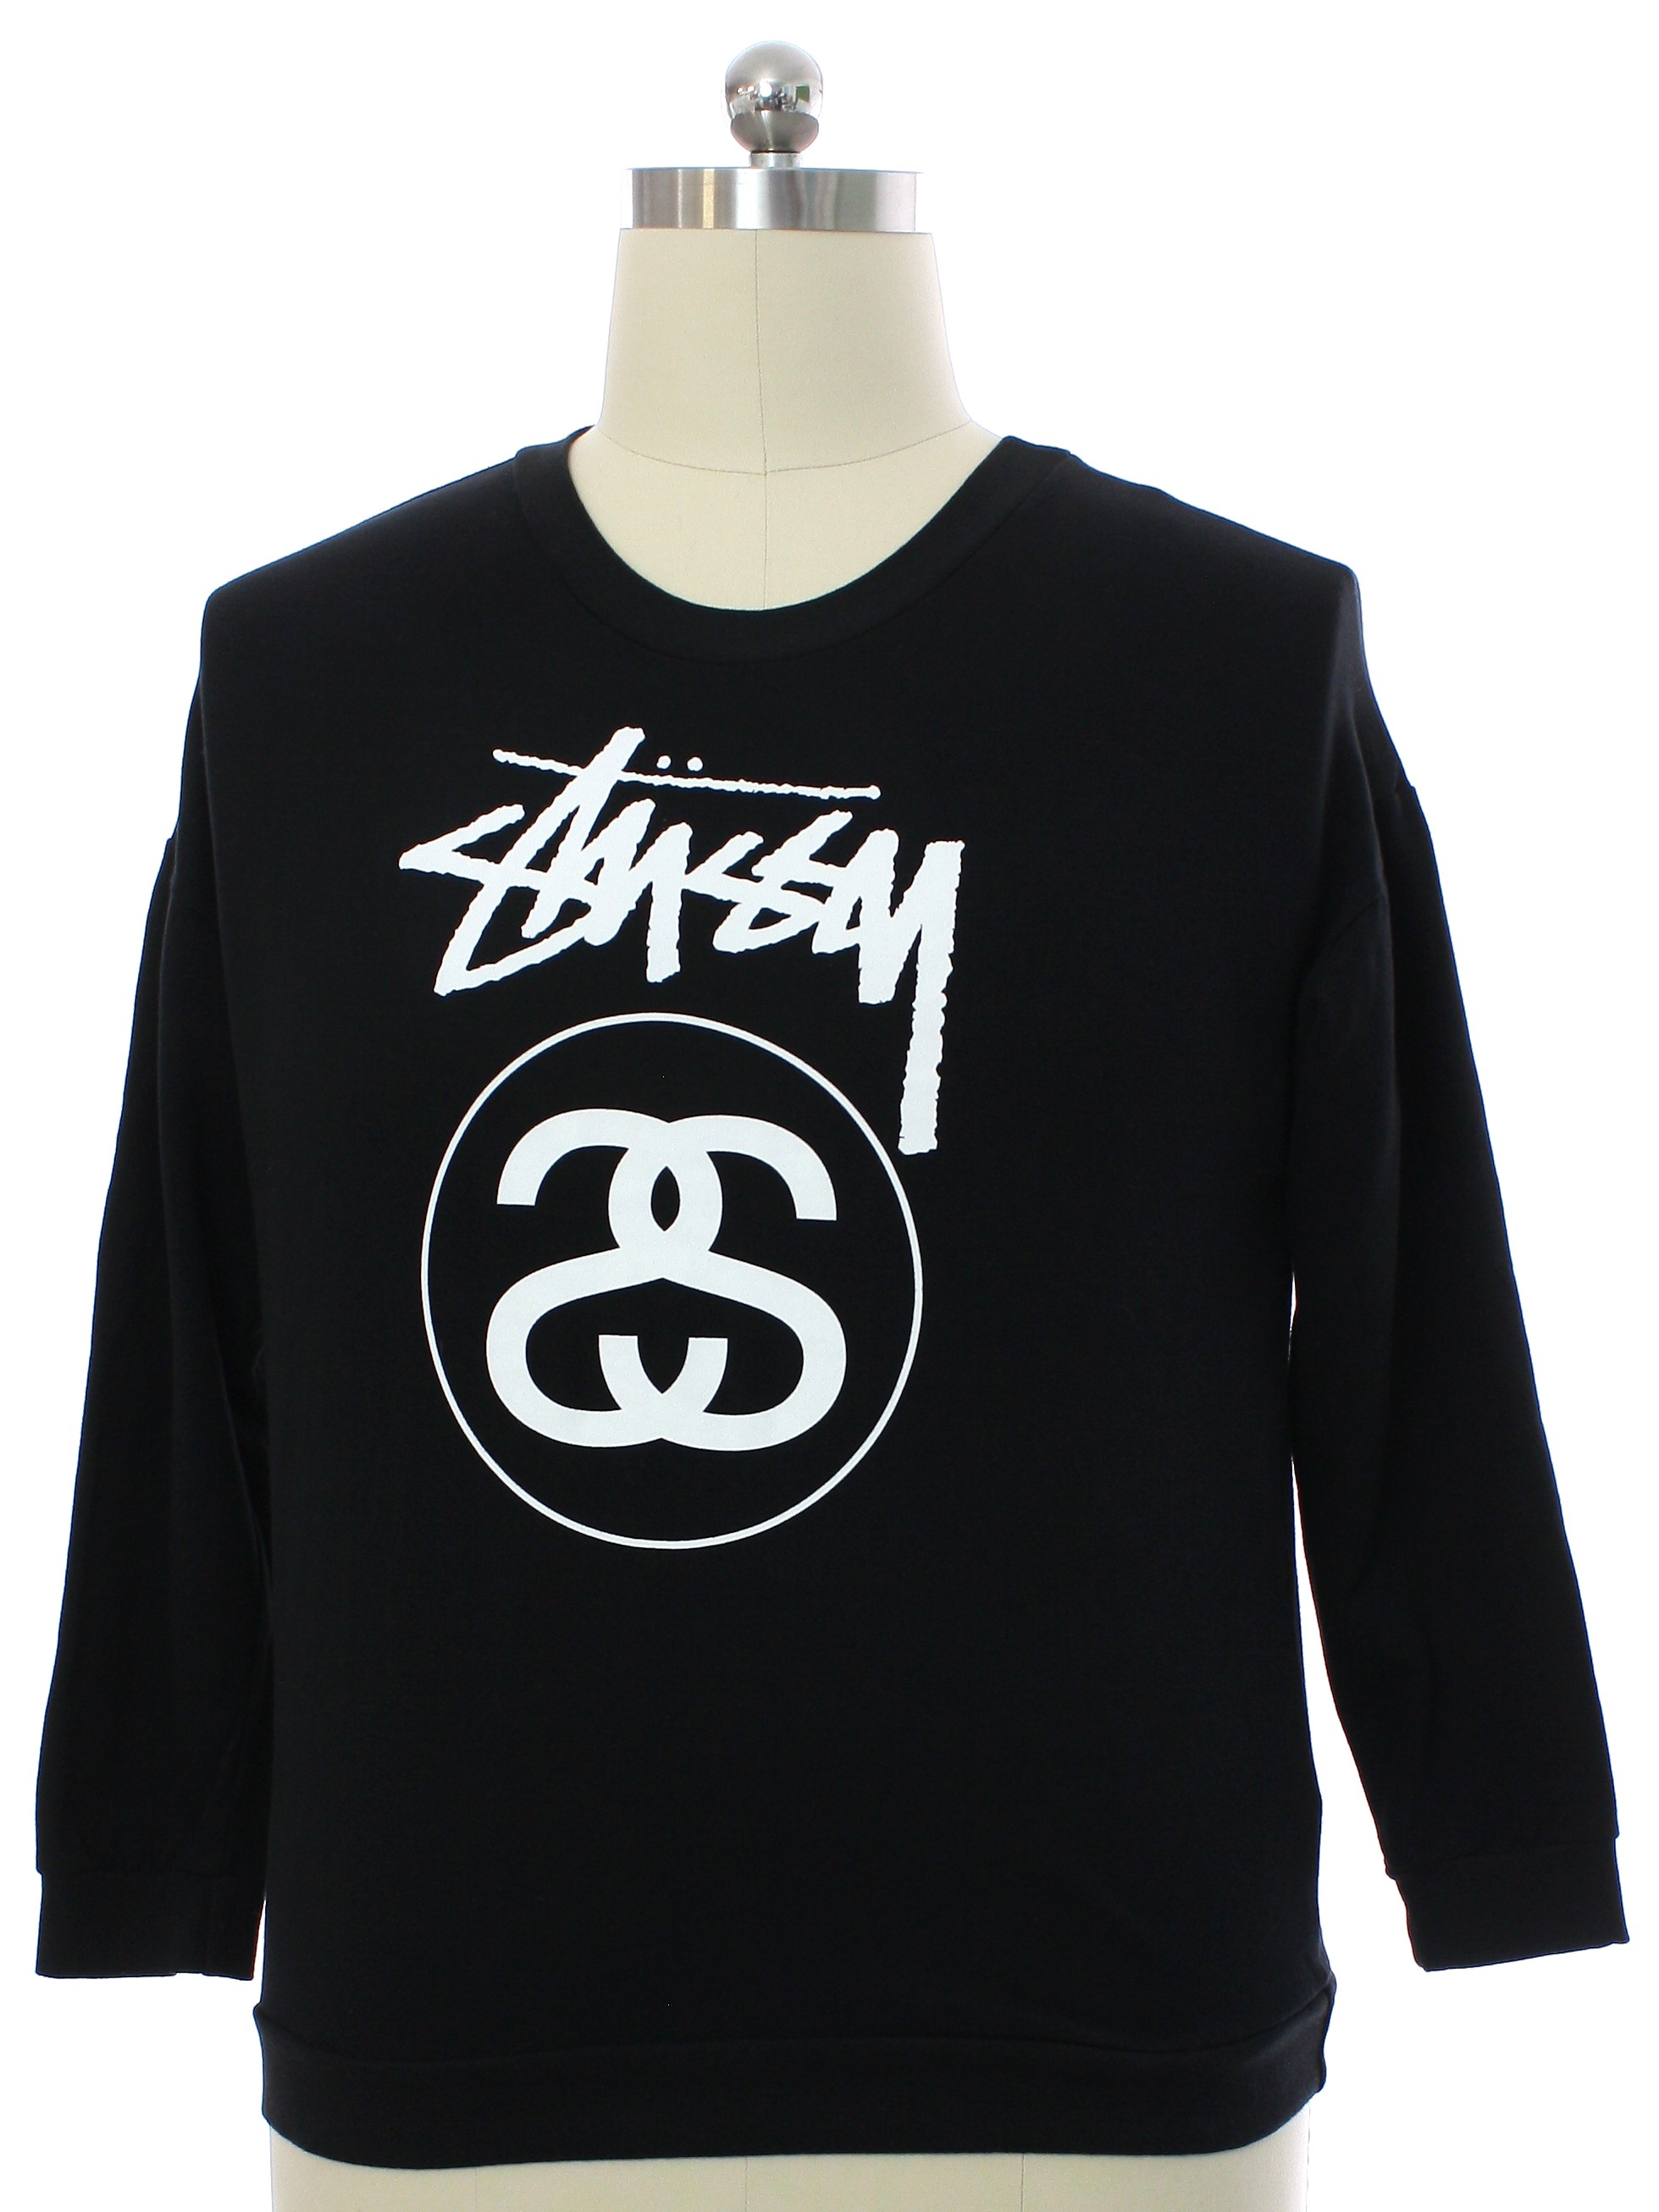 Retro 1990s Shirt: 90s -Stussy, Made in USA- Mens black background